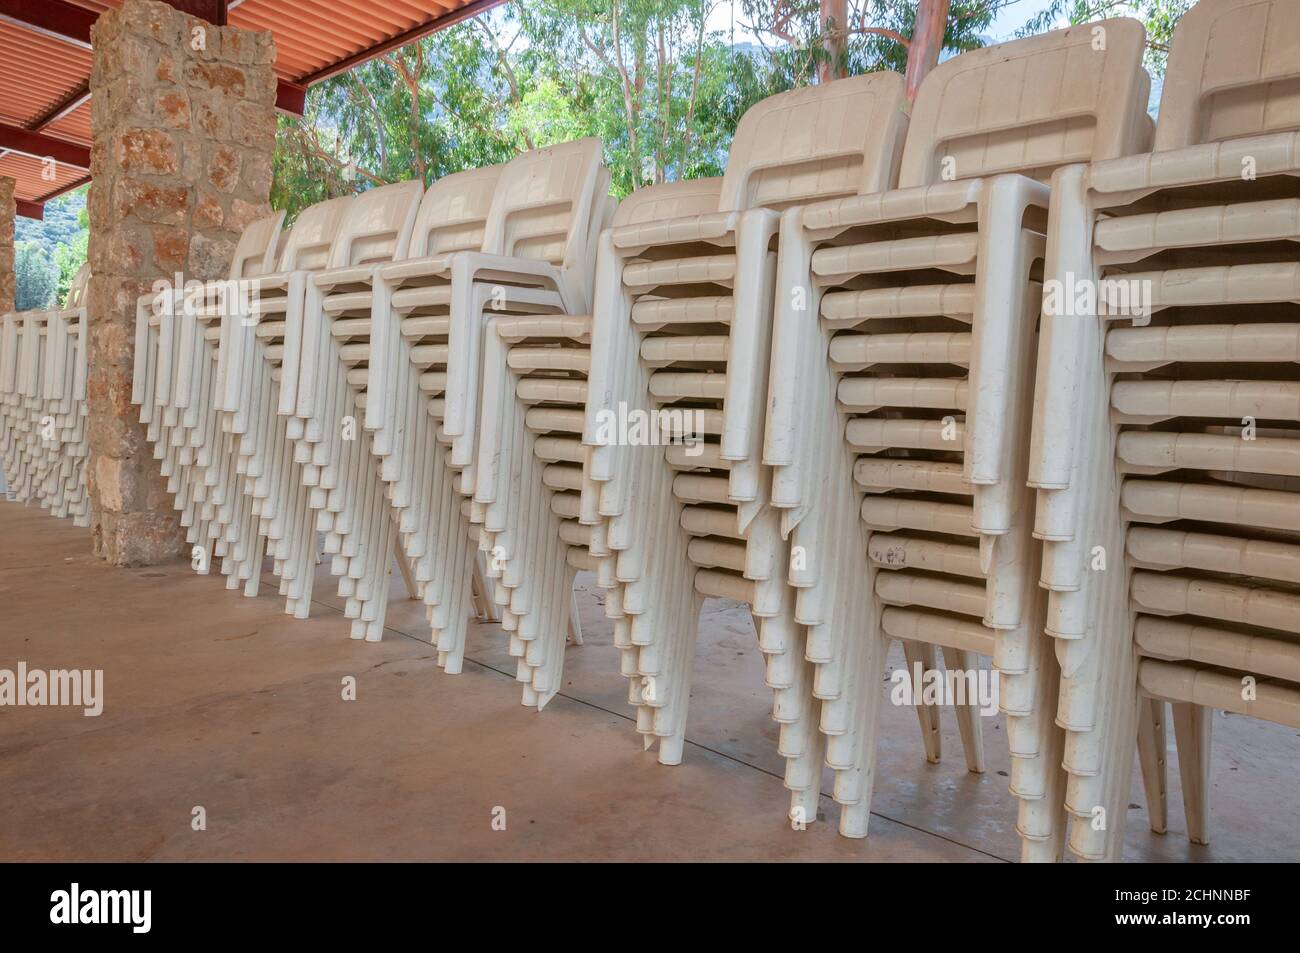 White plastic sallies stacked in a row inside a shed. Conceptual image Stock Photo